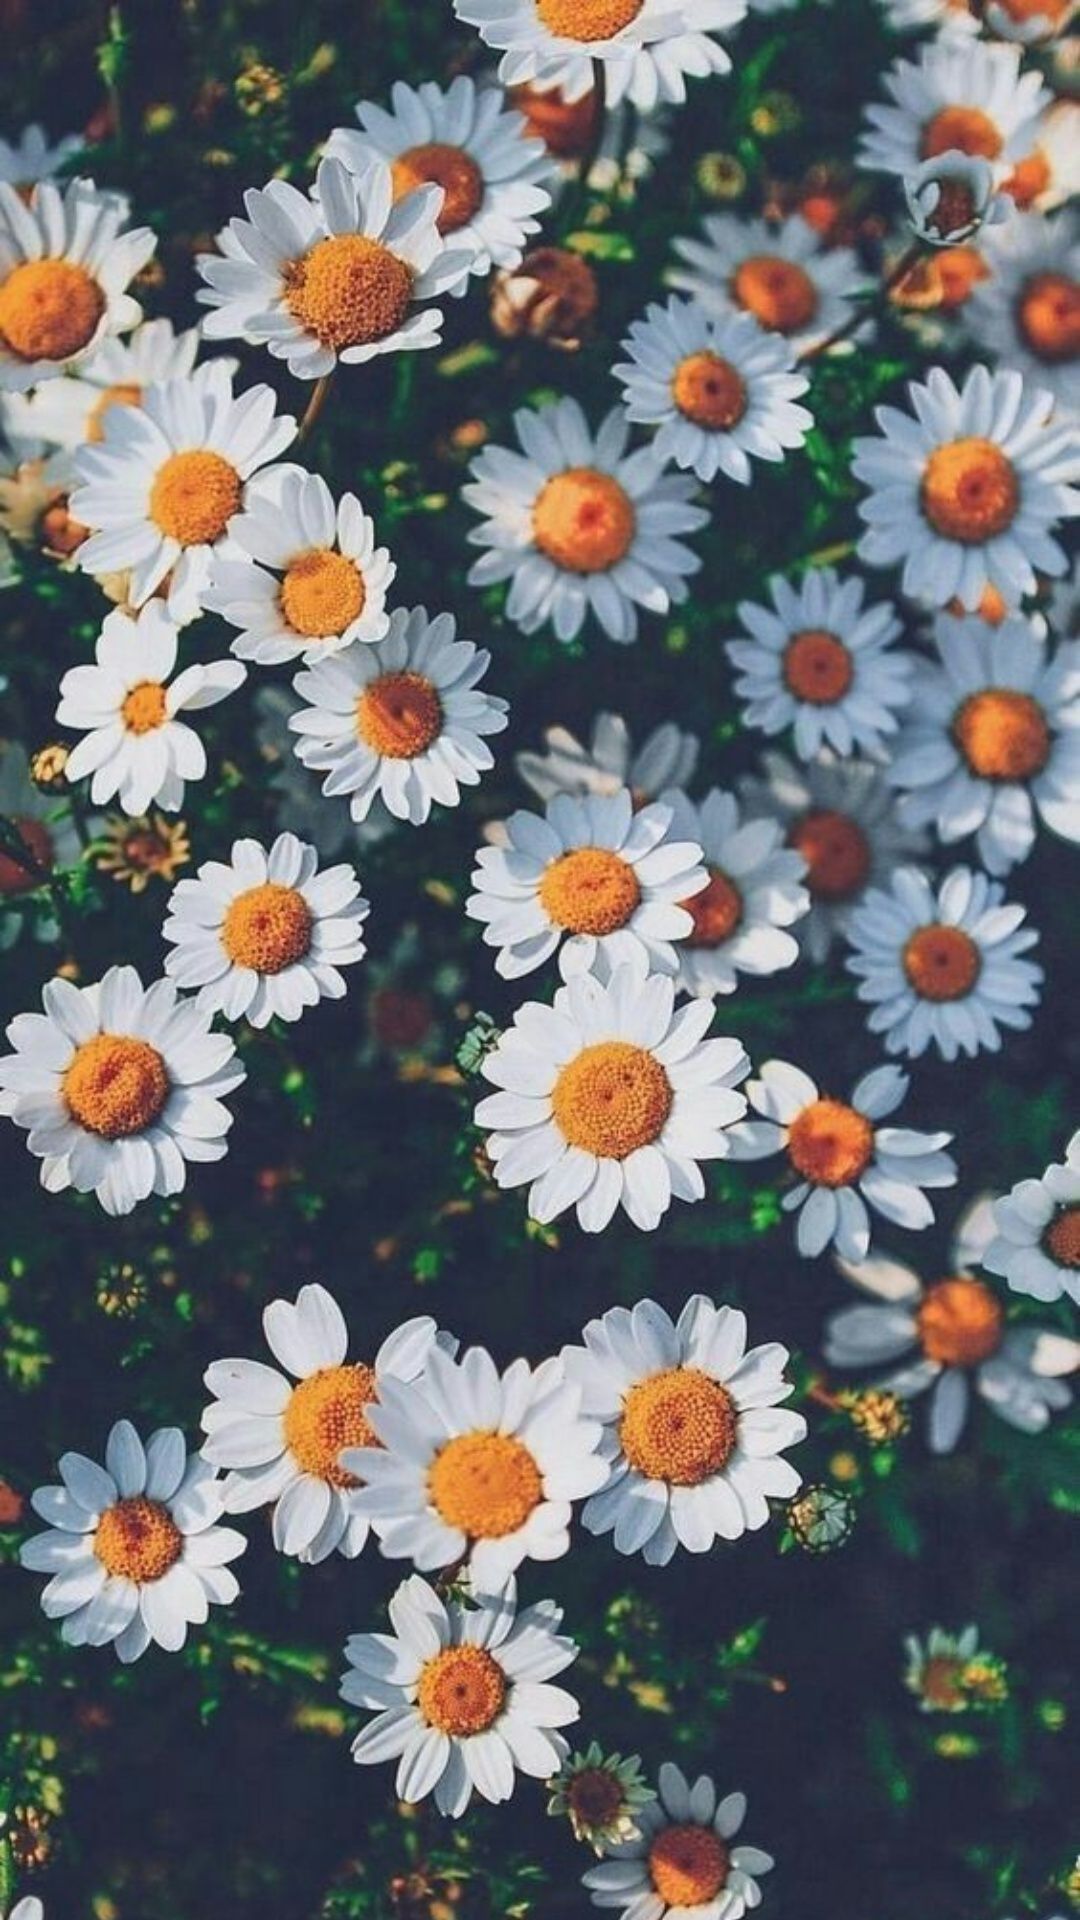 A wallpaper of daisies - Nature, Android